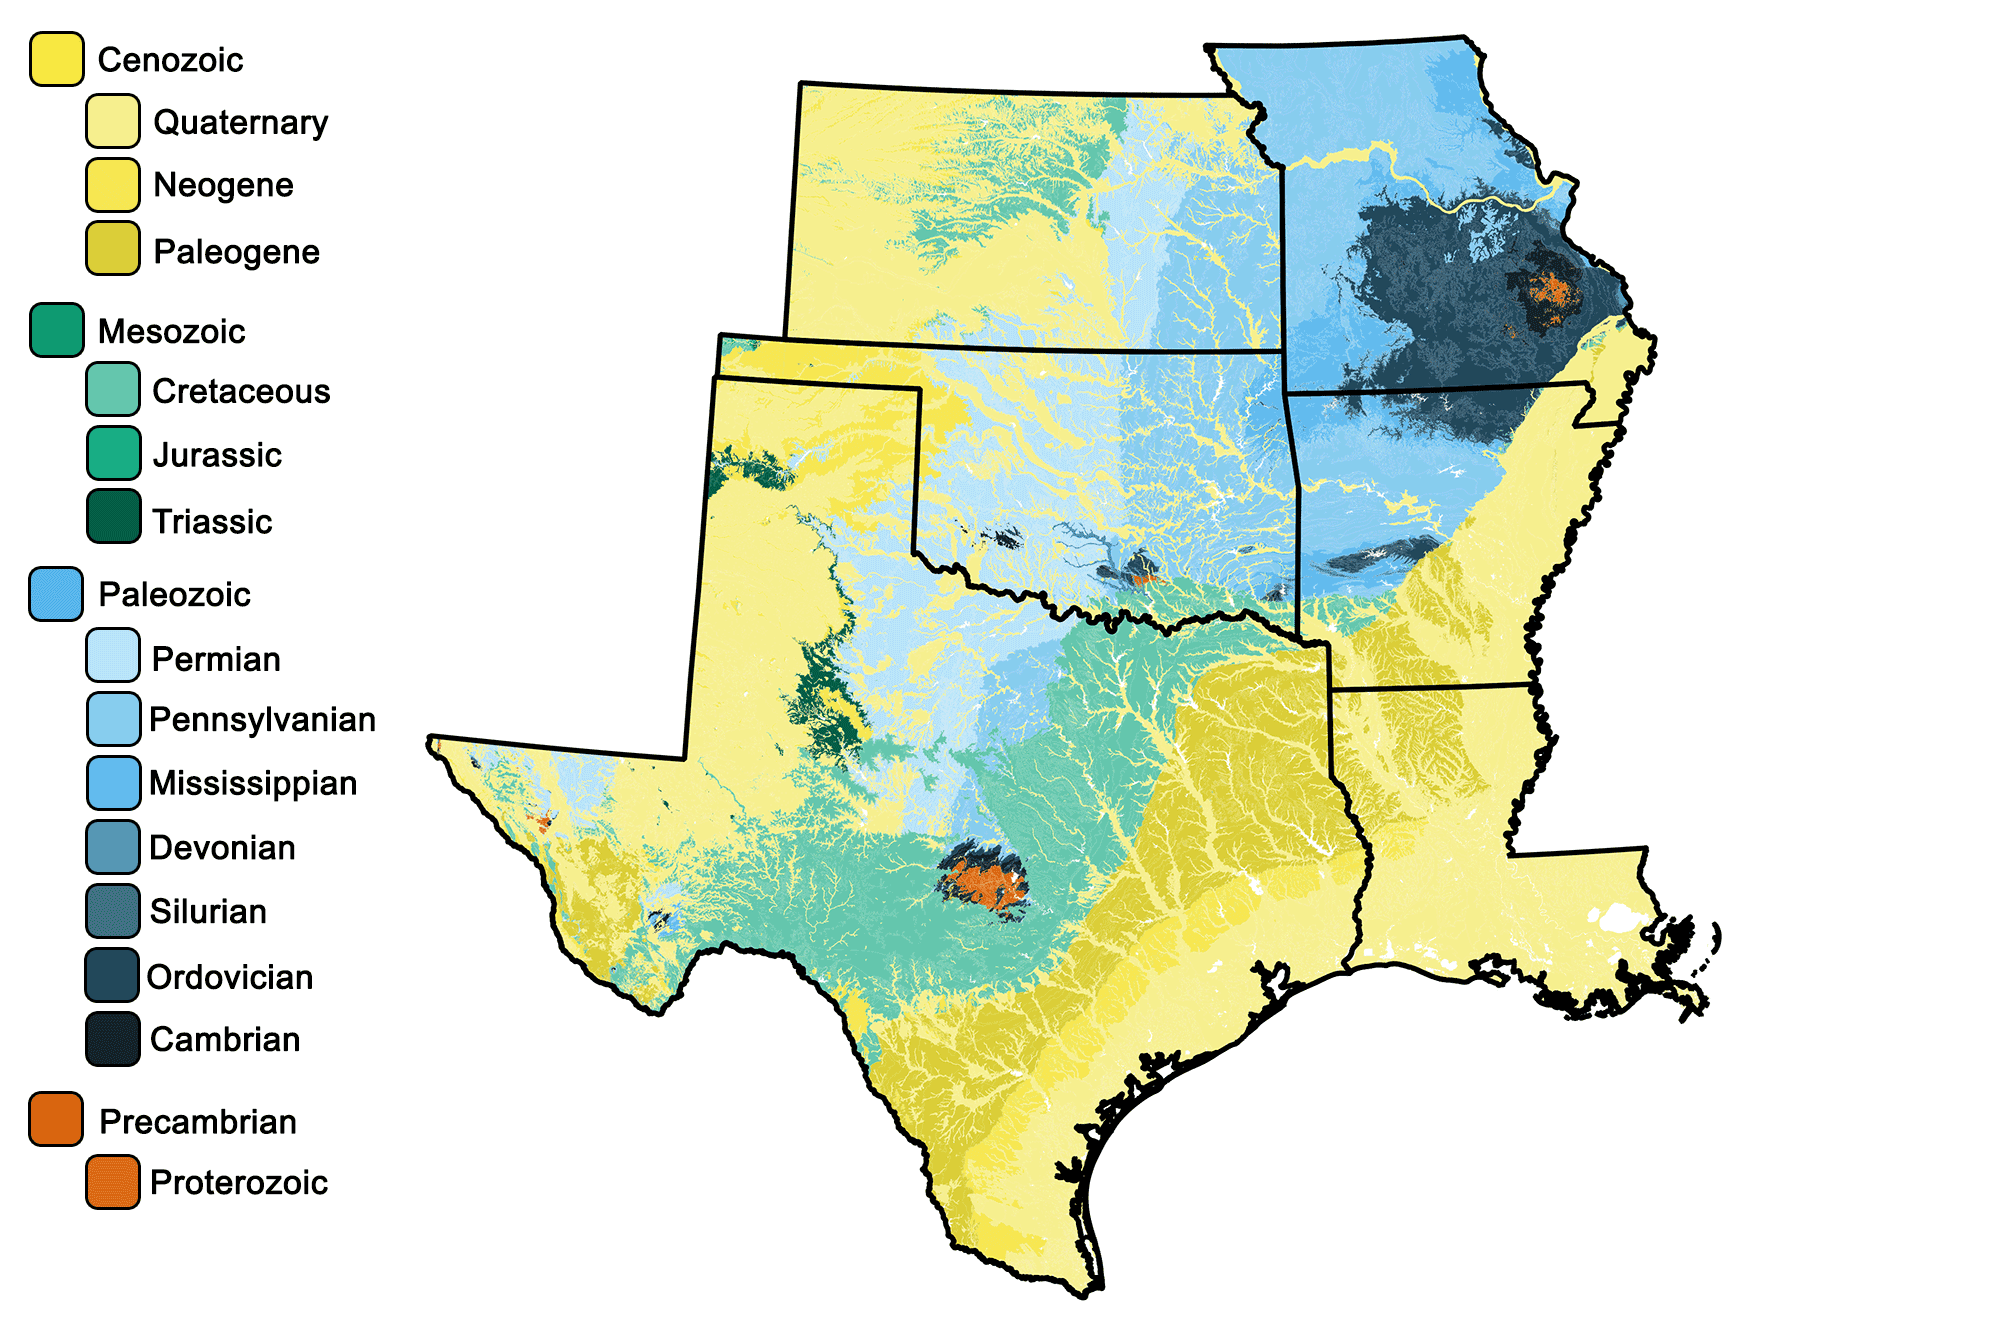 Geologic map of the South-Central United States.